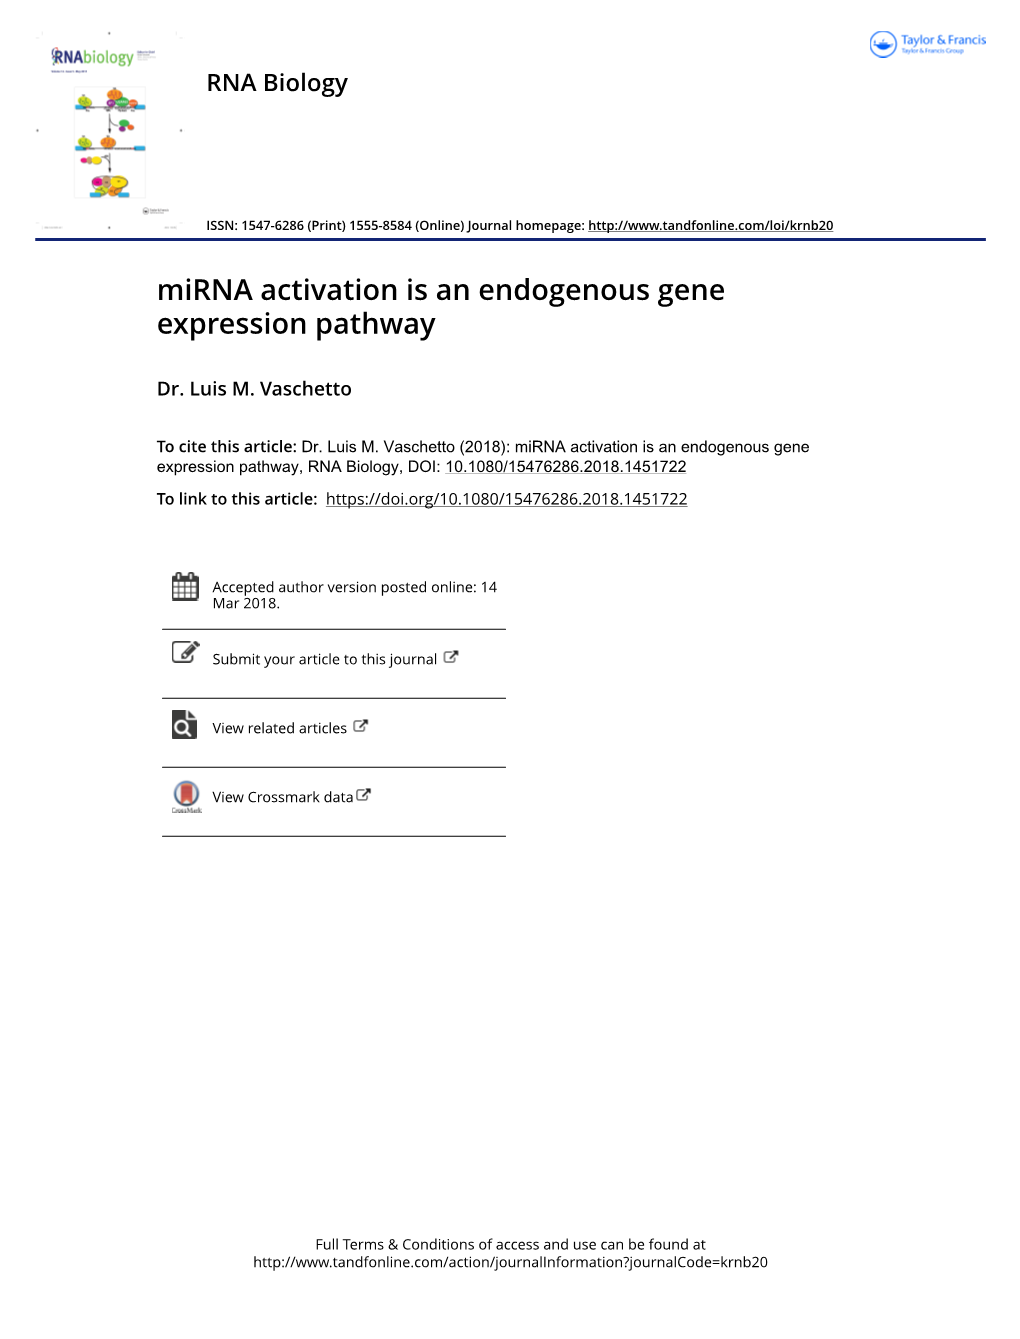 Mirna Activation Is an Endogenous Gene Expression Pathway